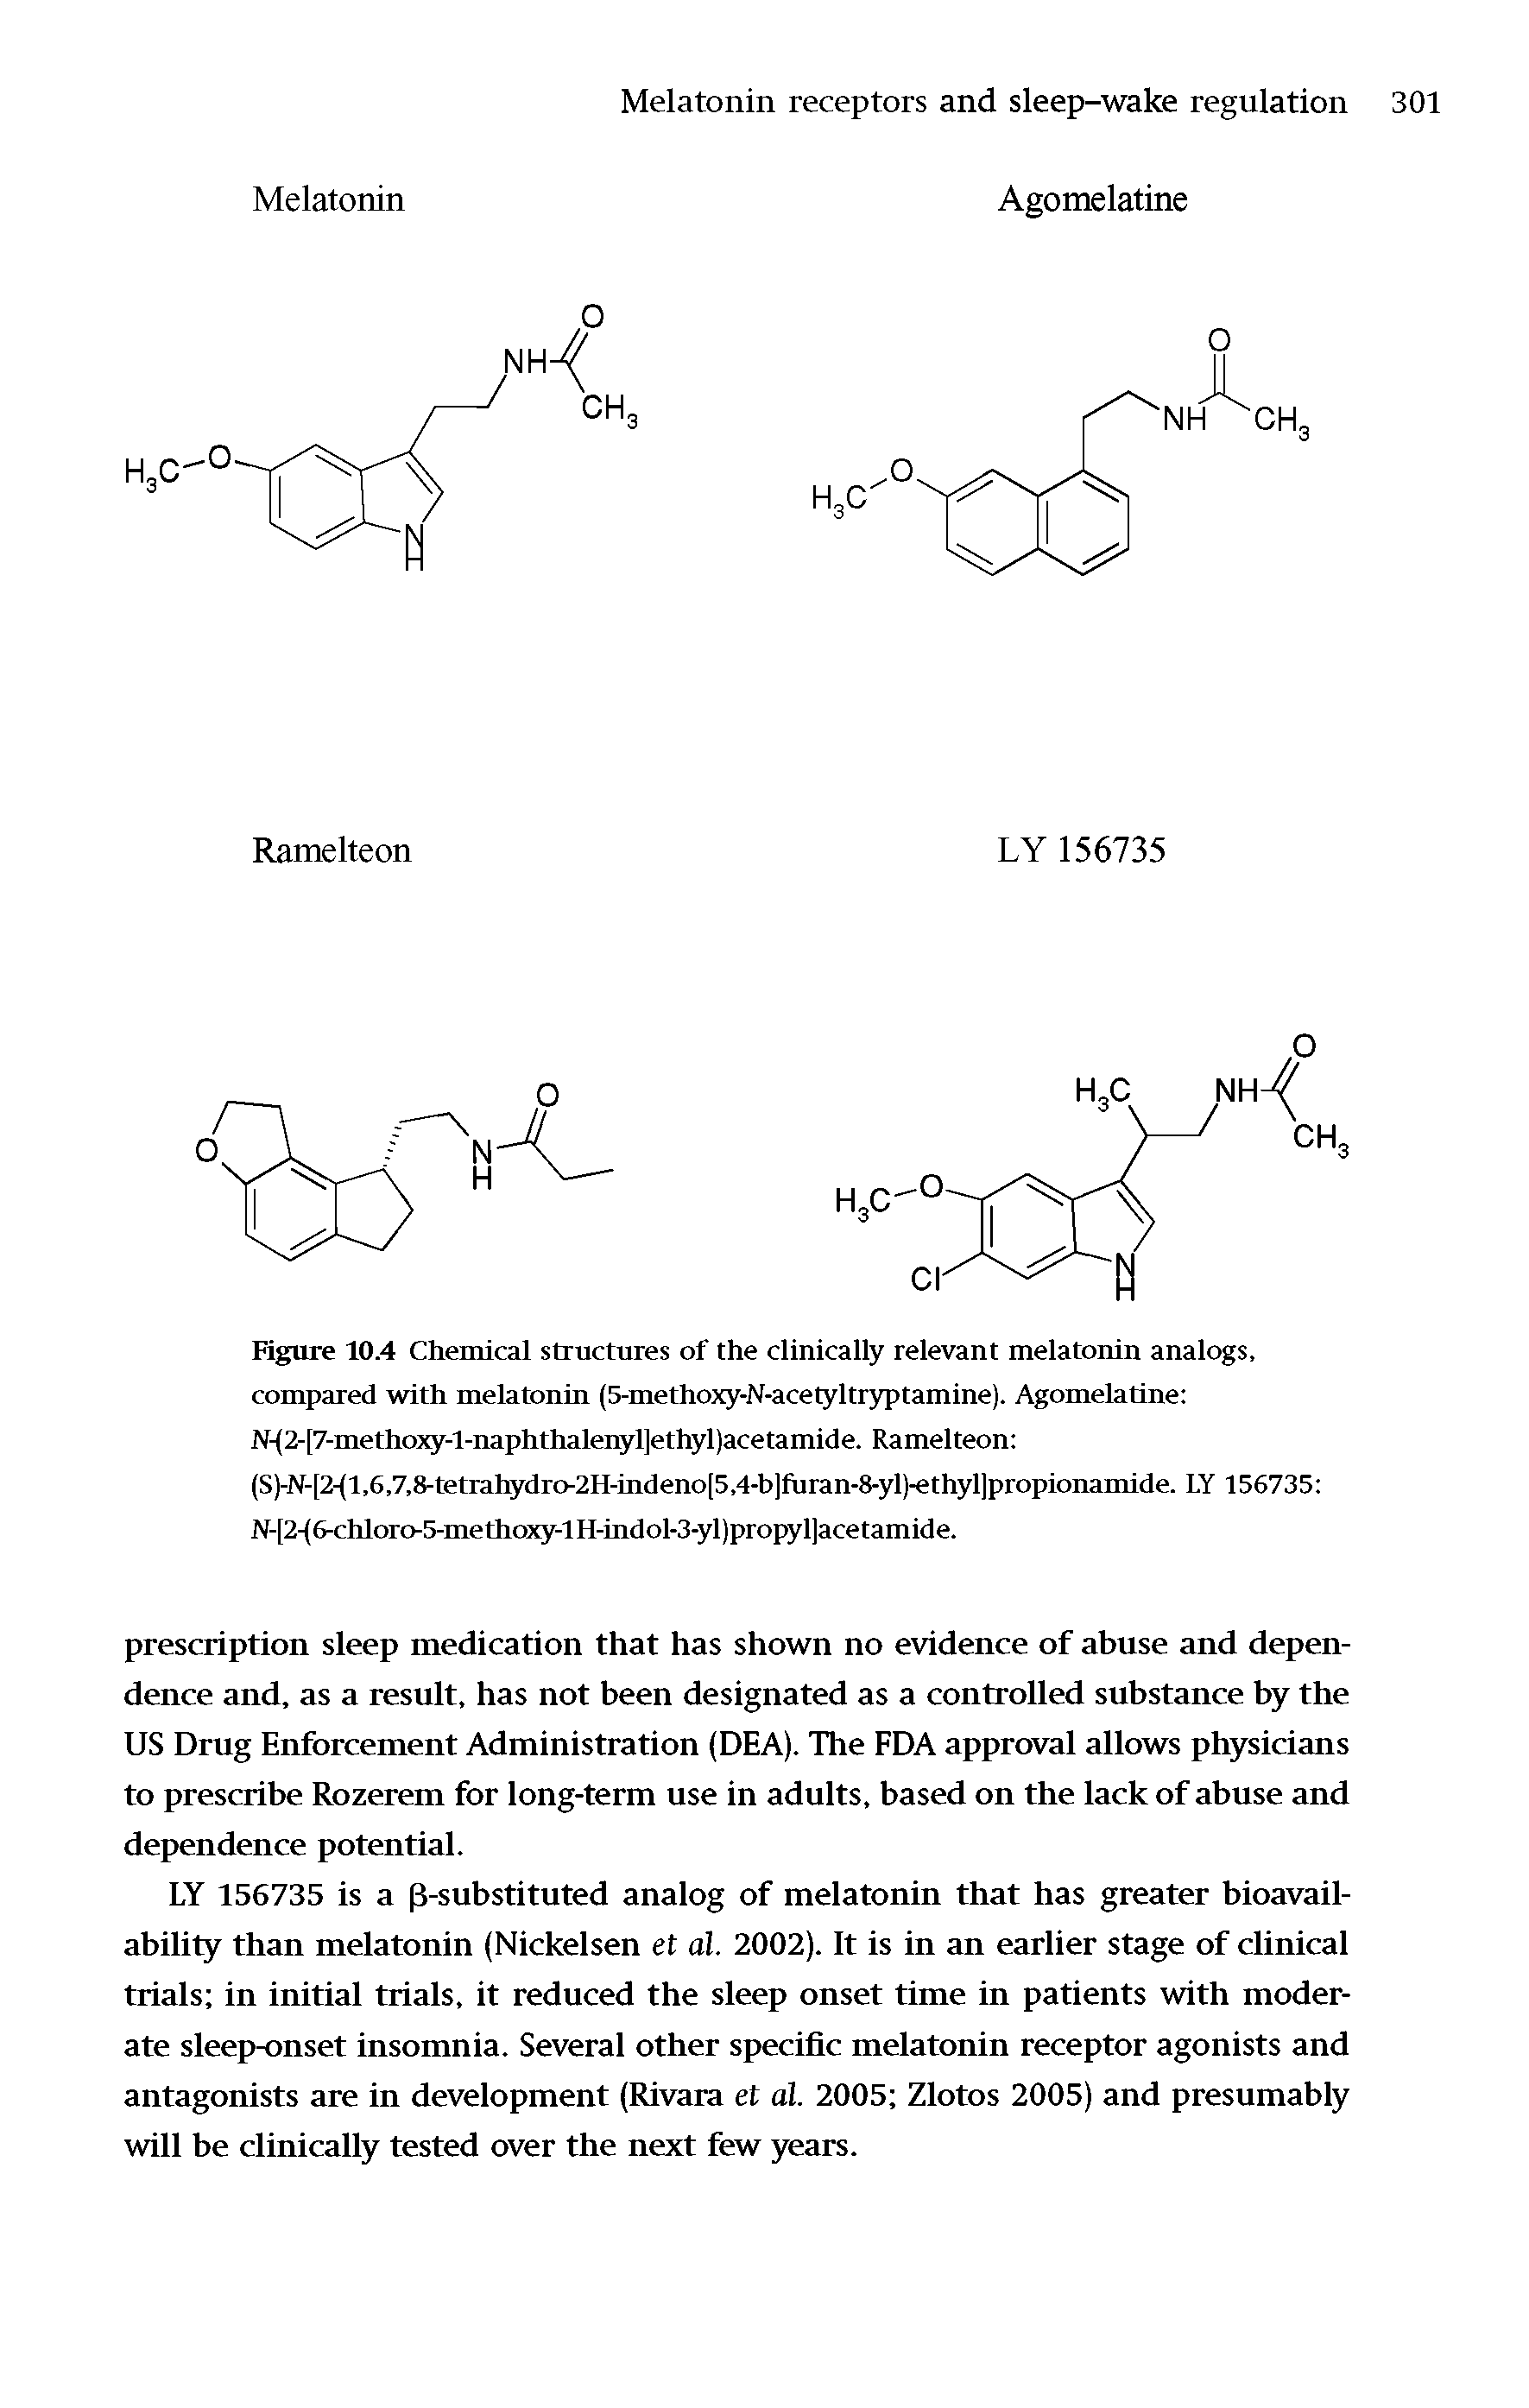 Figure 10.4 Chemical structures of the clinically relevant melatonin analogs, compared with melatonin (5-methoxy-N-acetyltryptamine). Agomelatine N- 2-[7-methoxy-l-naphthalenyl]ethyl)acetamide. Ramelteon ...